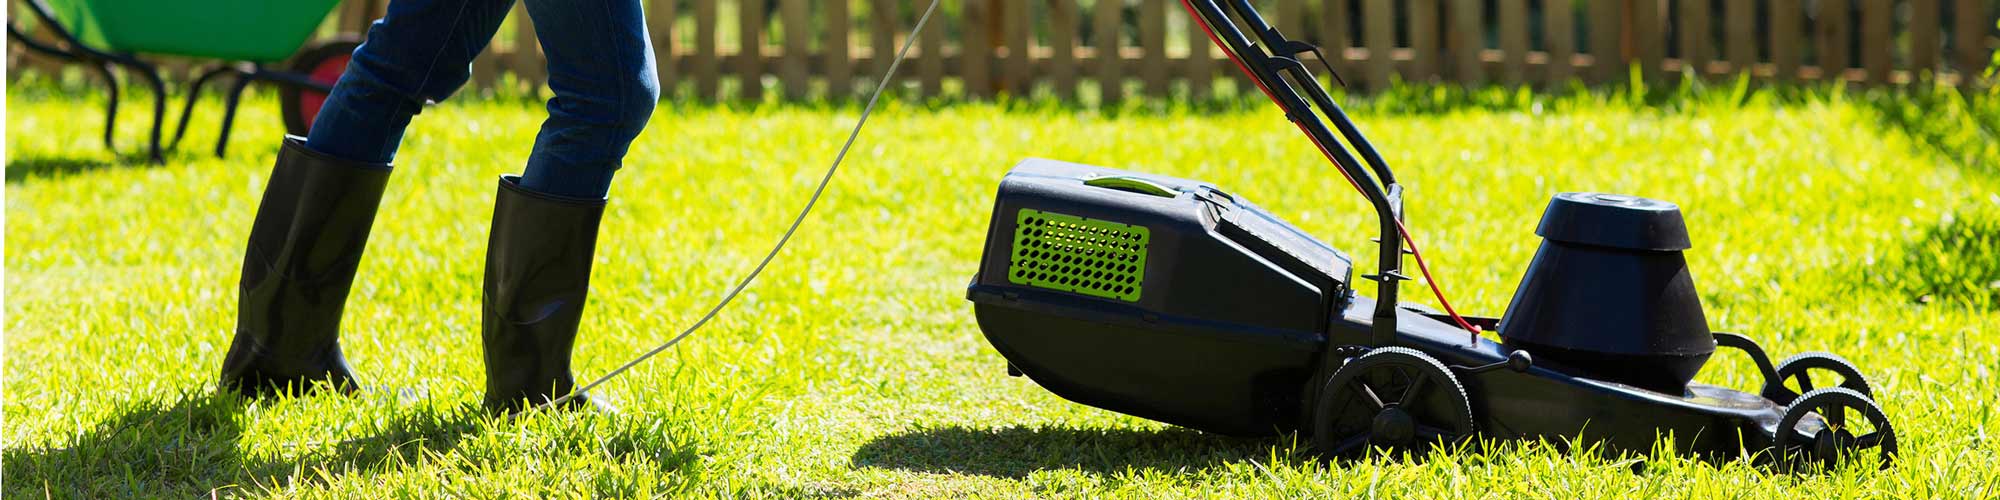 Electric Lawn Mower Blades Not Spinning? Try This